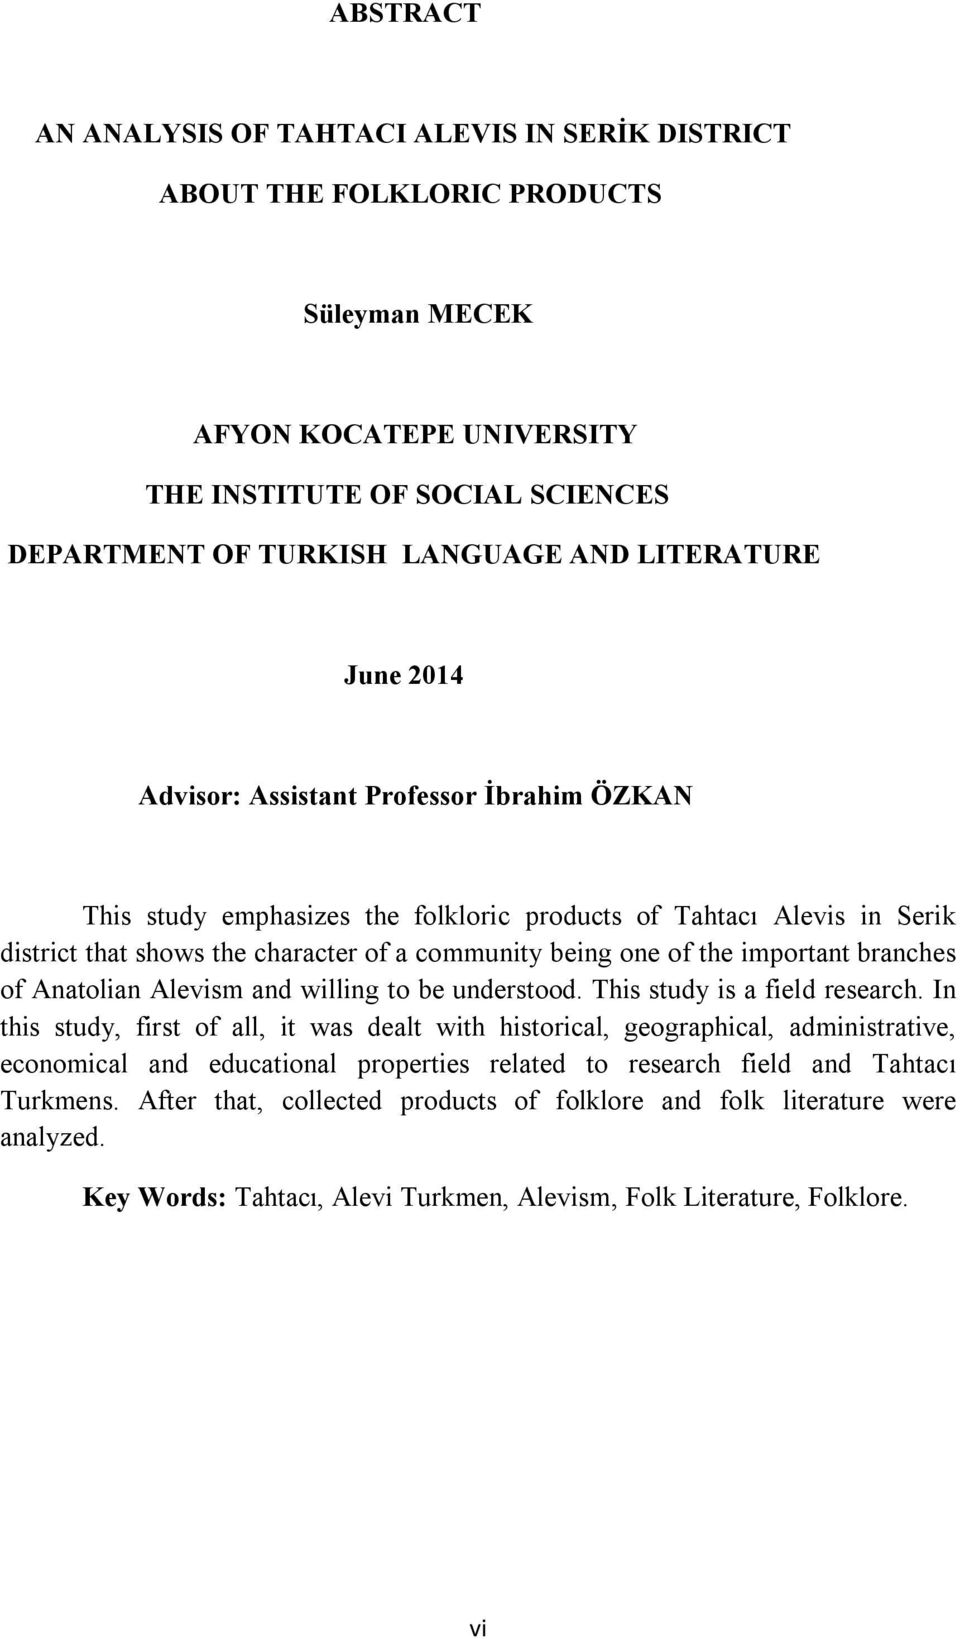 the important branches of Anatolian Alevism and willing to be understood. This study is a field research.